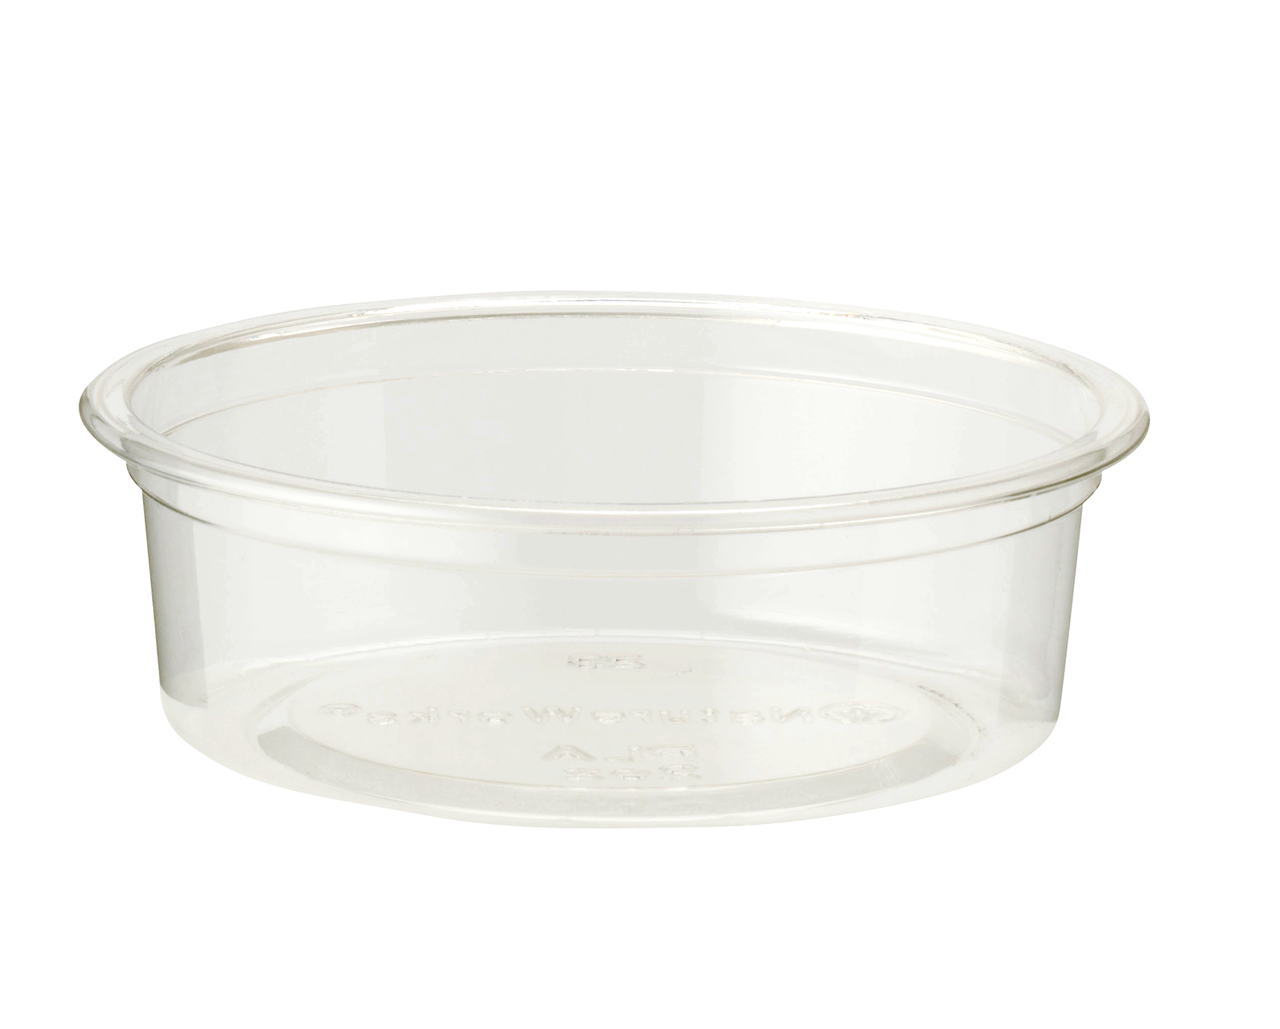 Squatz 50 Microwavable Food Container - 32oz Translucent Meal Box Storage with Lids, Ideal for Storing Soups, Condiments, Sau